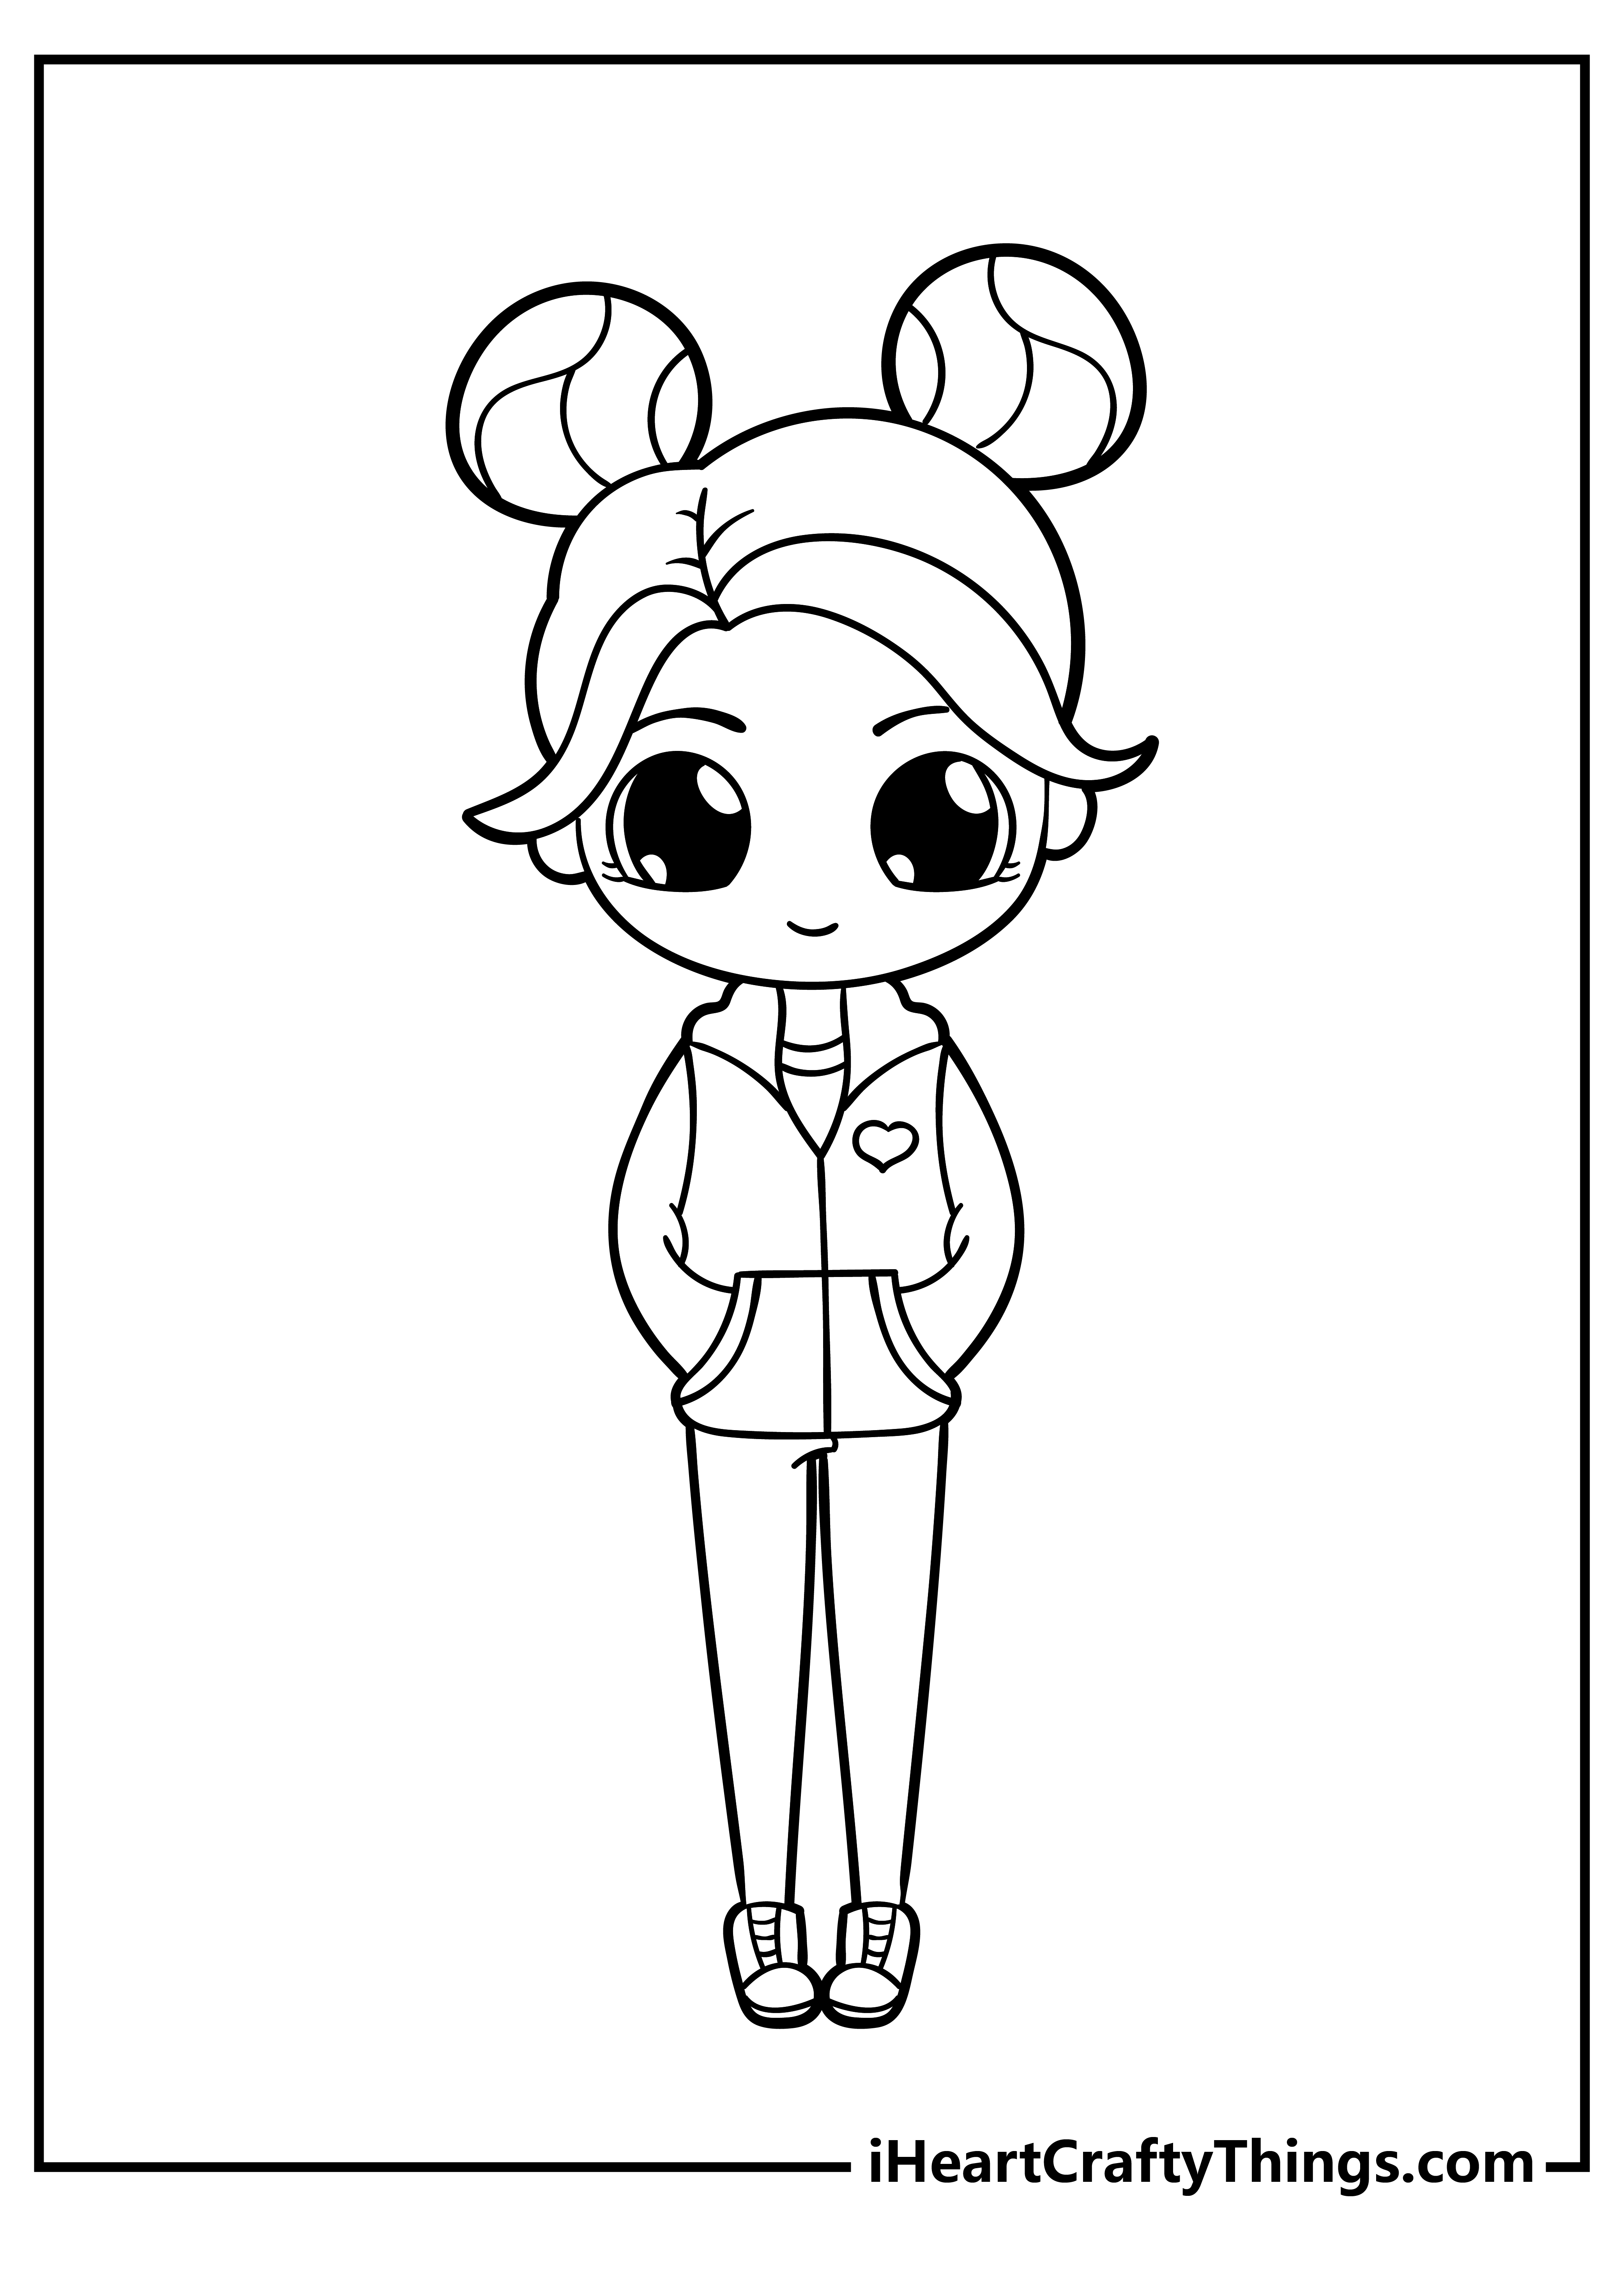 https://iheartcraftythings.com/wp-content/uploads/2022/02/cute-coloring-pages-for-girls-1.png